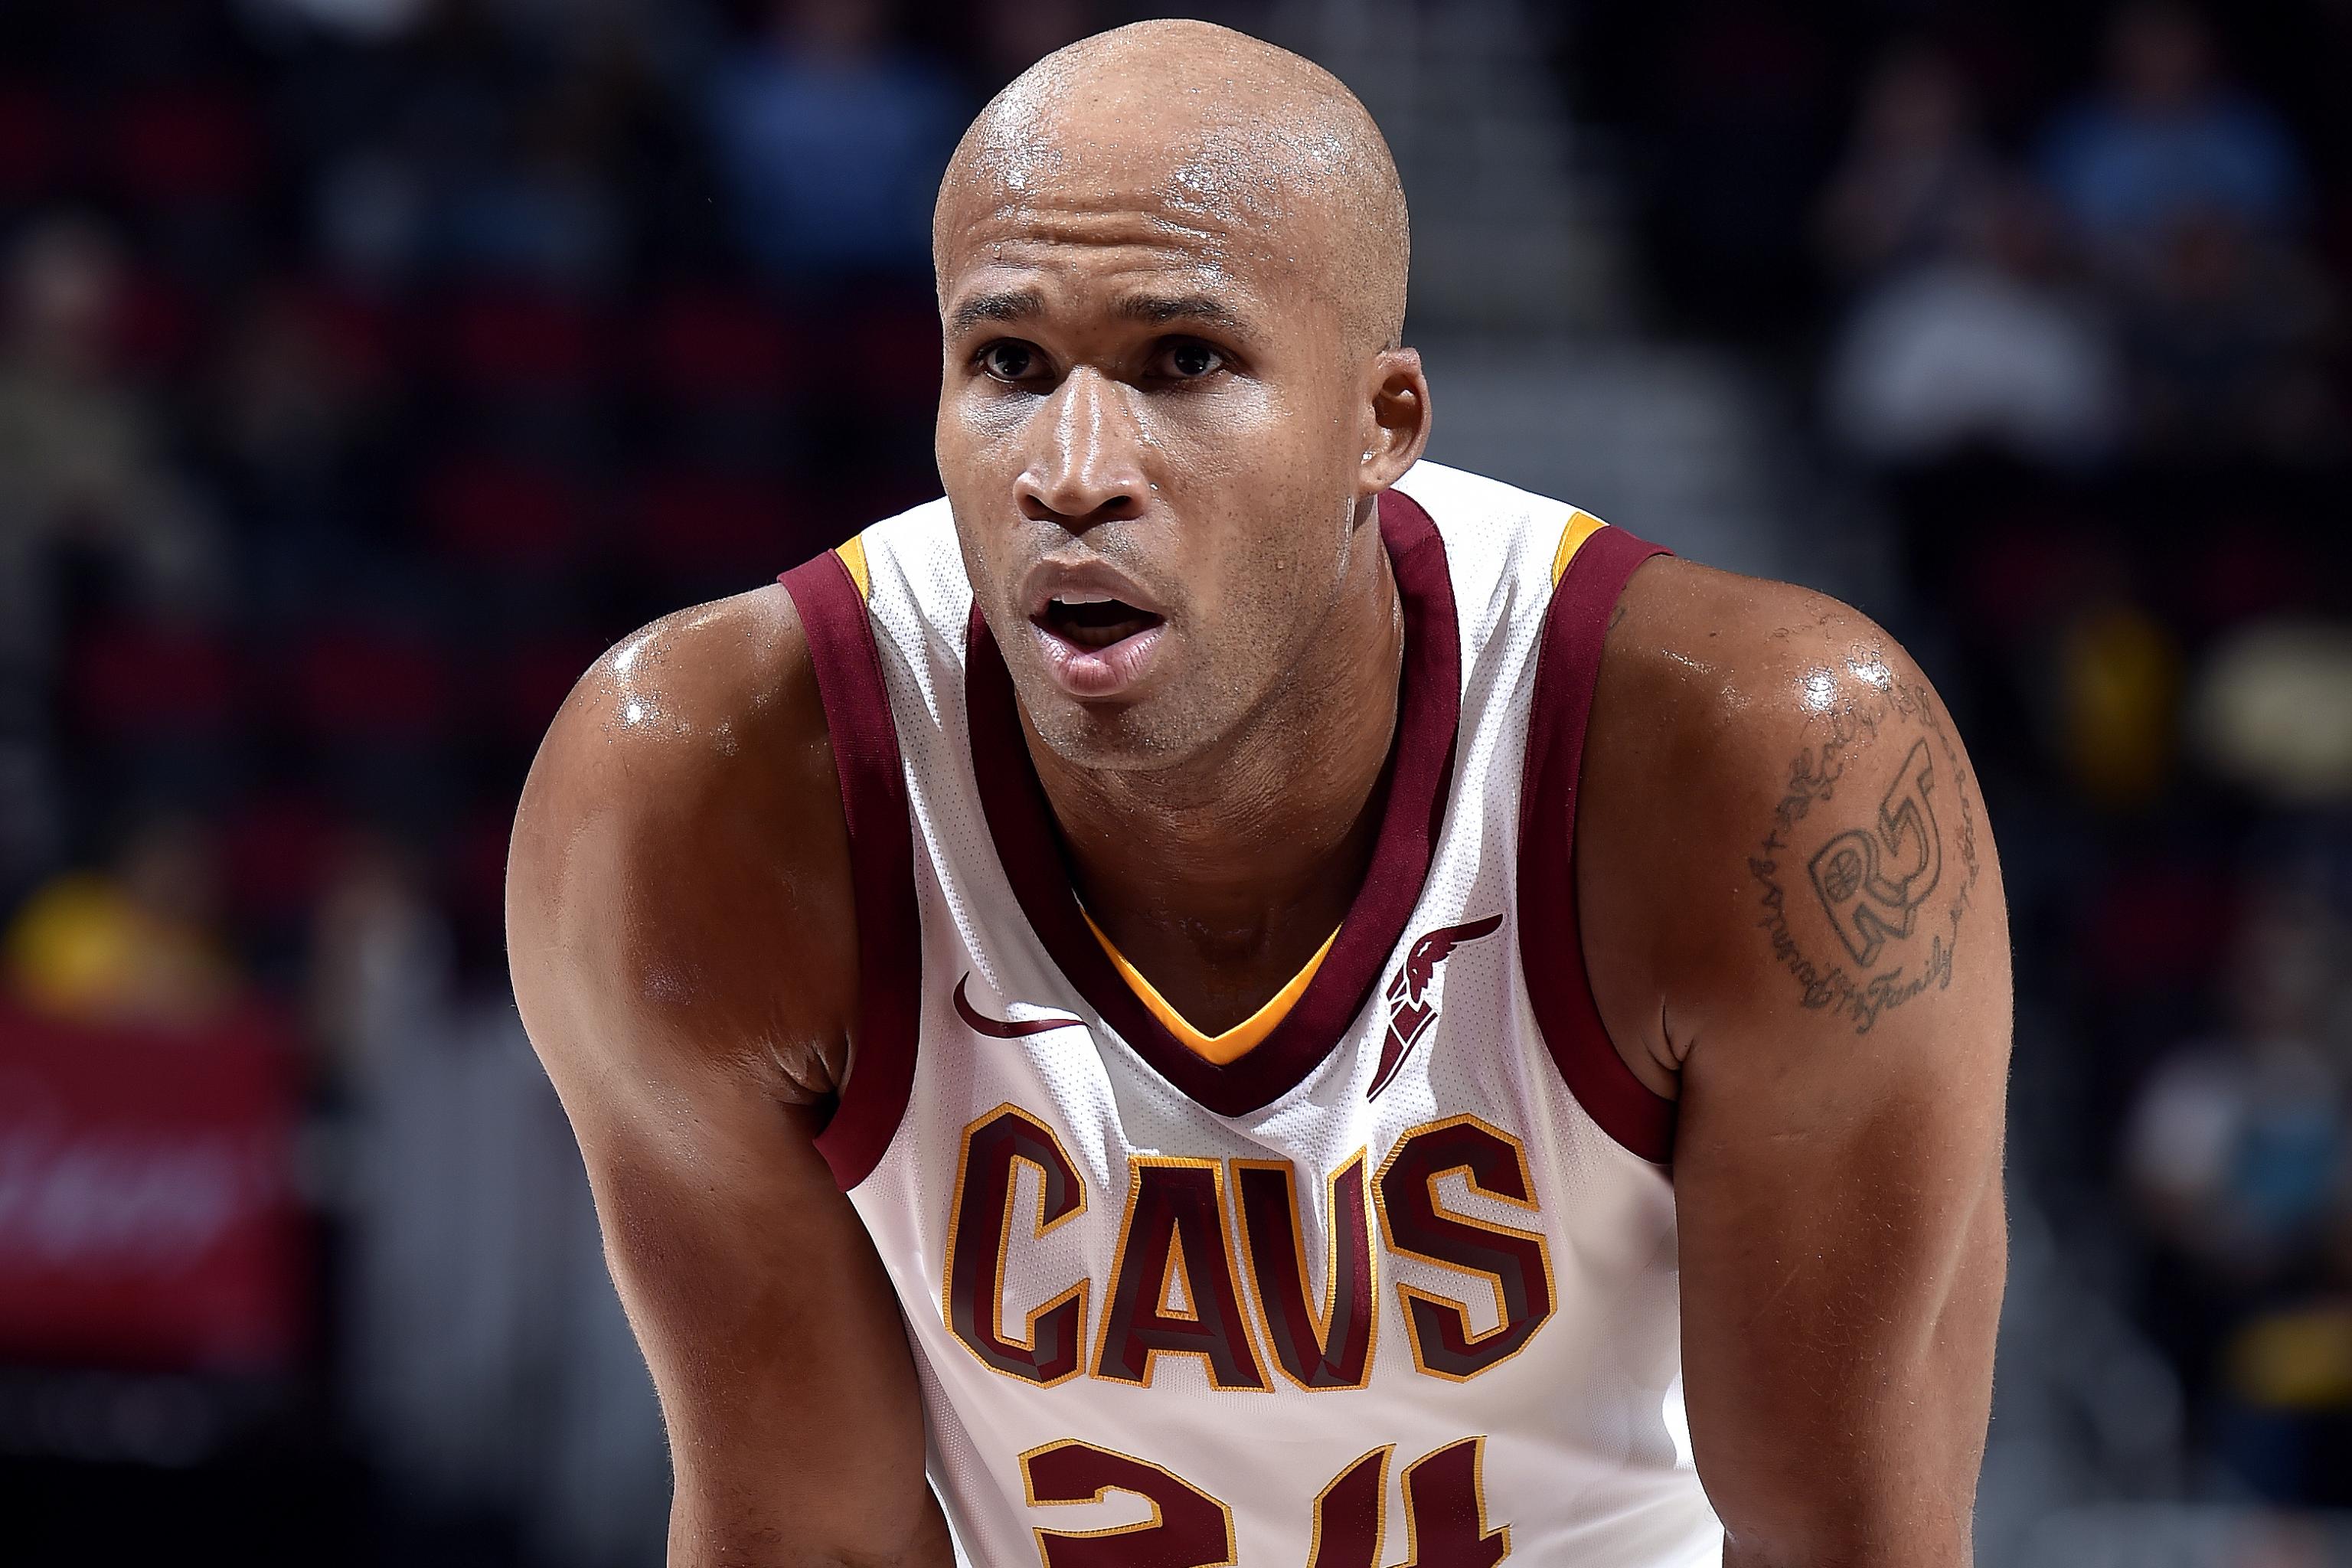 Richard Jefferson Says He'll Play One More Year